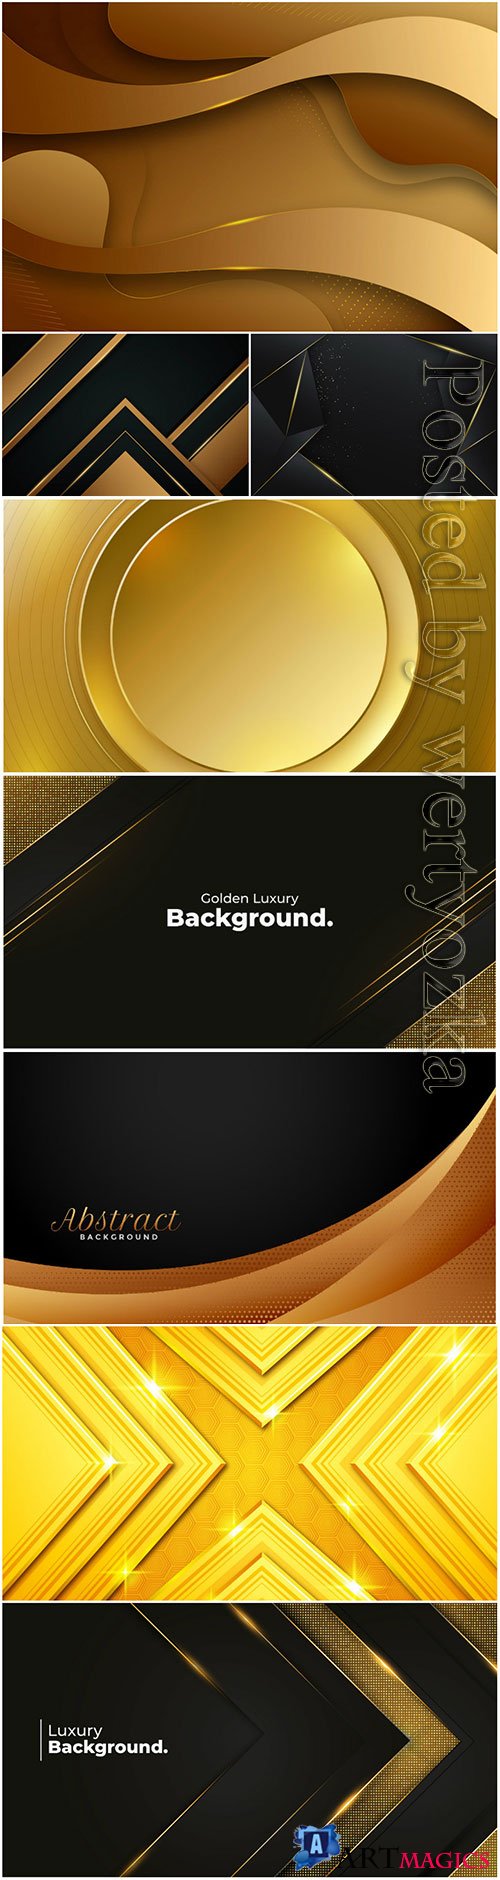 Vector backgrounds with gold decor